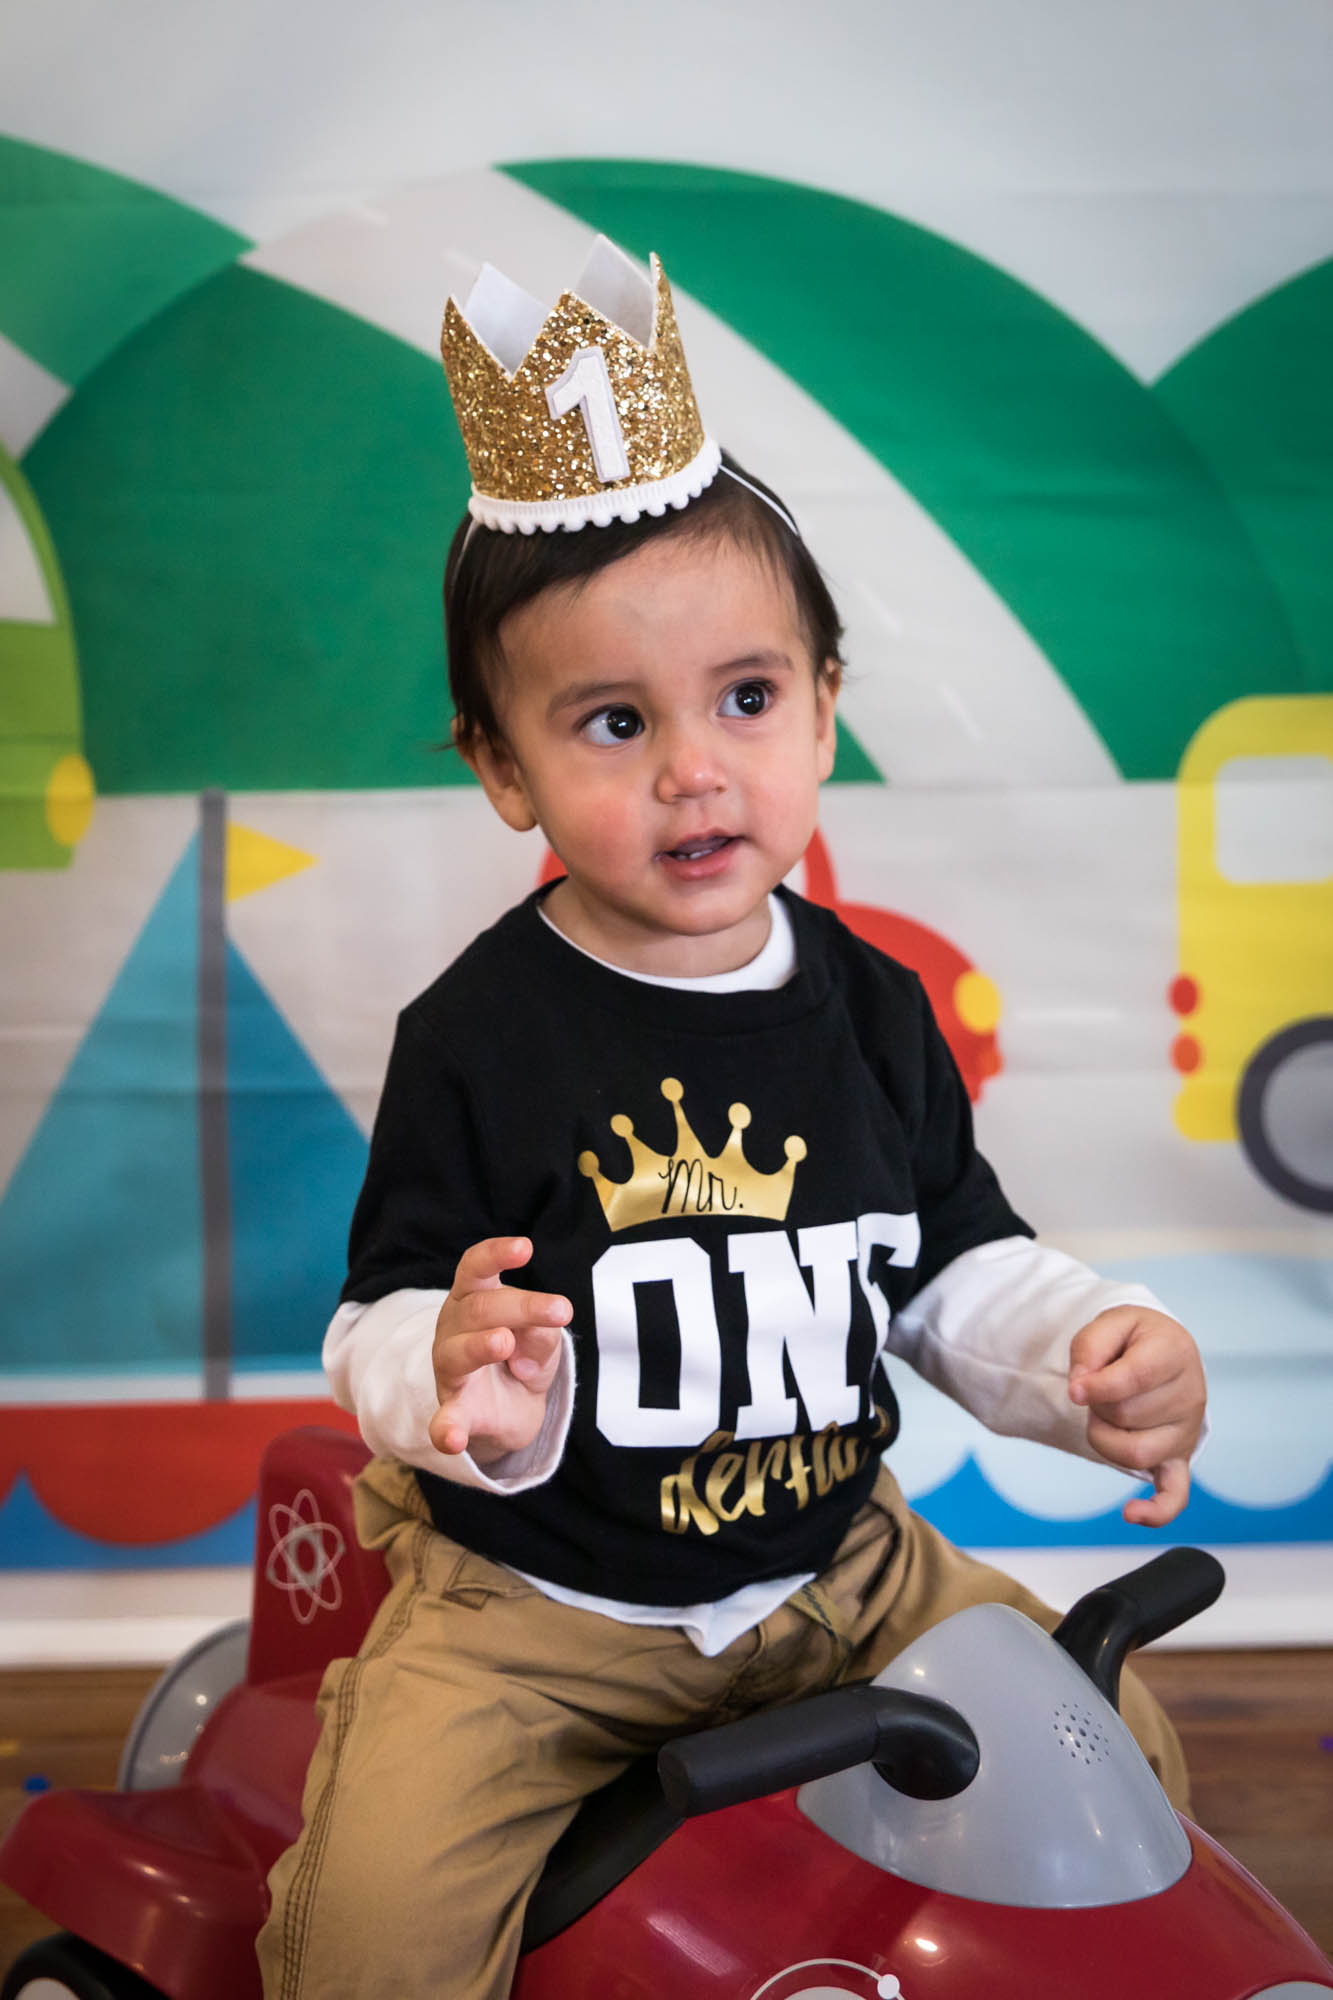 Little boy wearing black t-shirt and gold crown sitting on scooter during a Queens family portrait